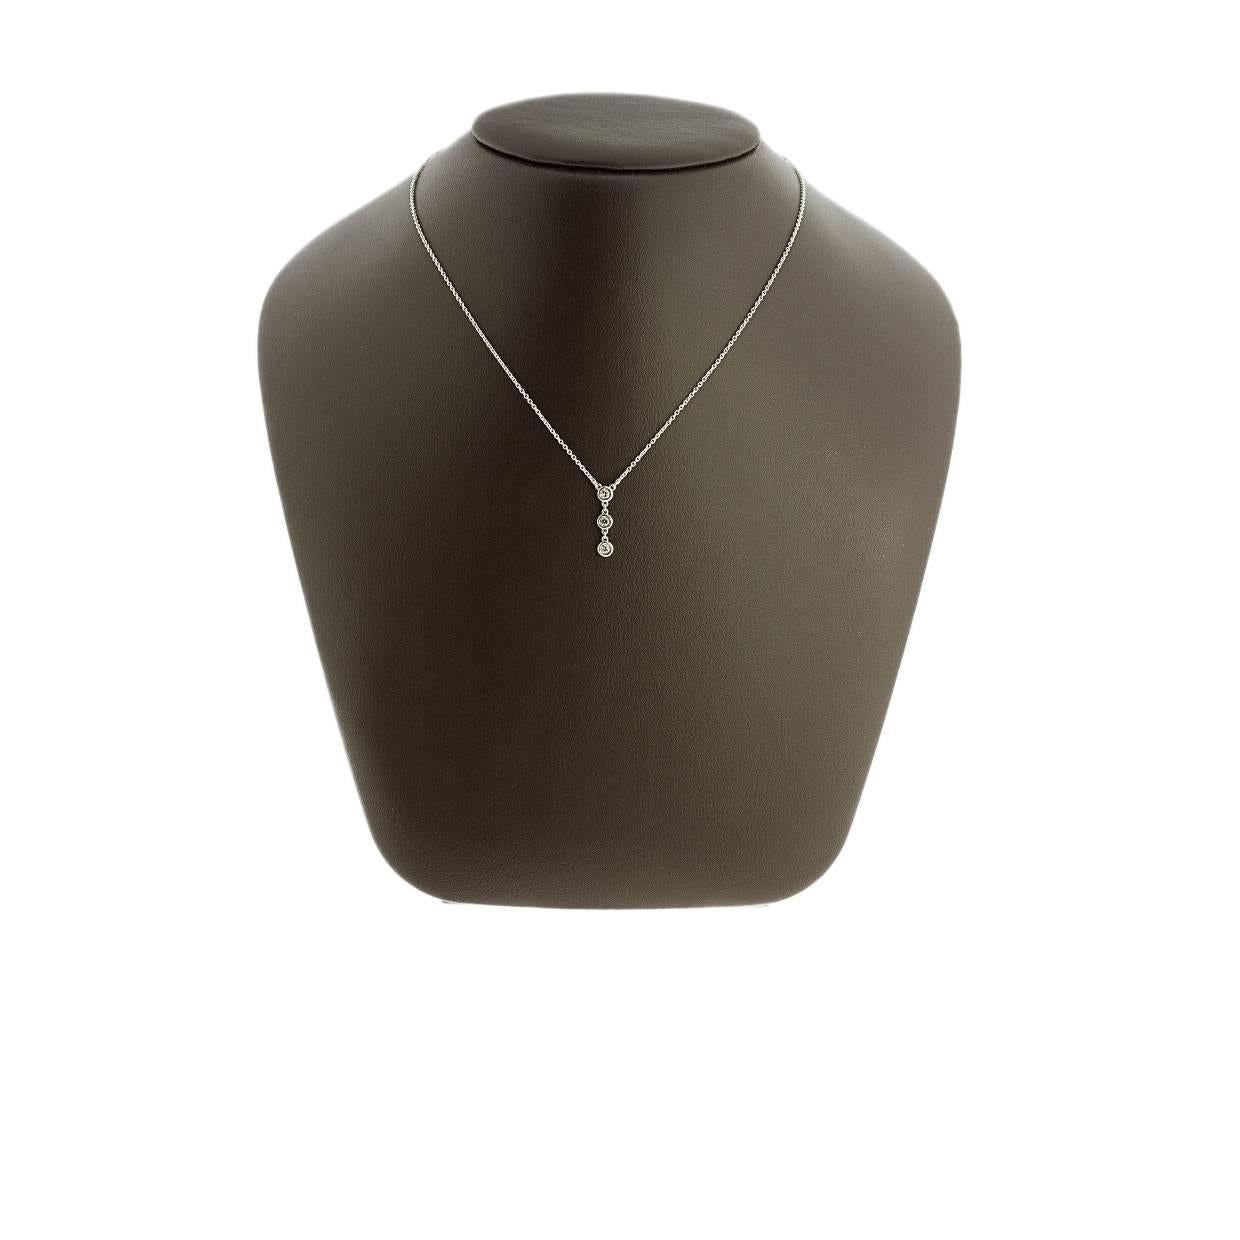 Make this beautiful Tiffany & Co. Elsa Peretti Diamond by the Yard drop pendant necklace yours today! It is comprised of sterling silver and sparkles with 0.10 carats of round diamonds. MSRP $1,175!

Tiffany & Co. Sterling Silver Necklace
Diamond by